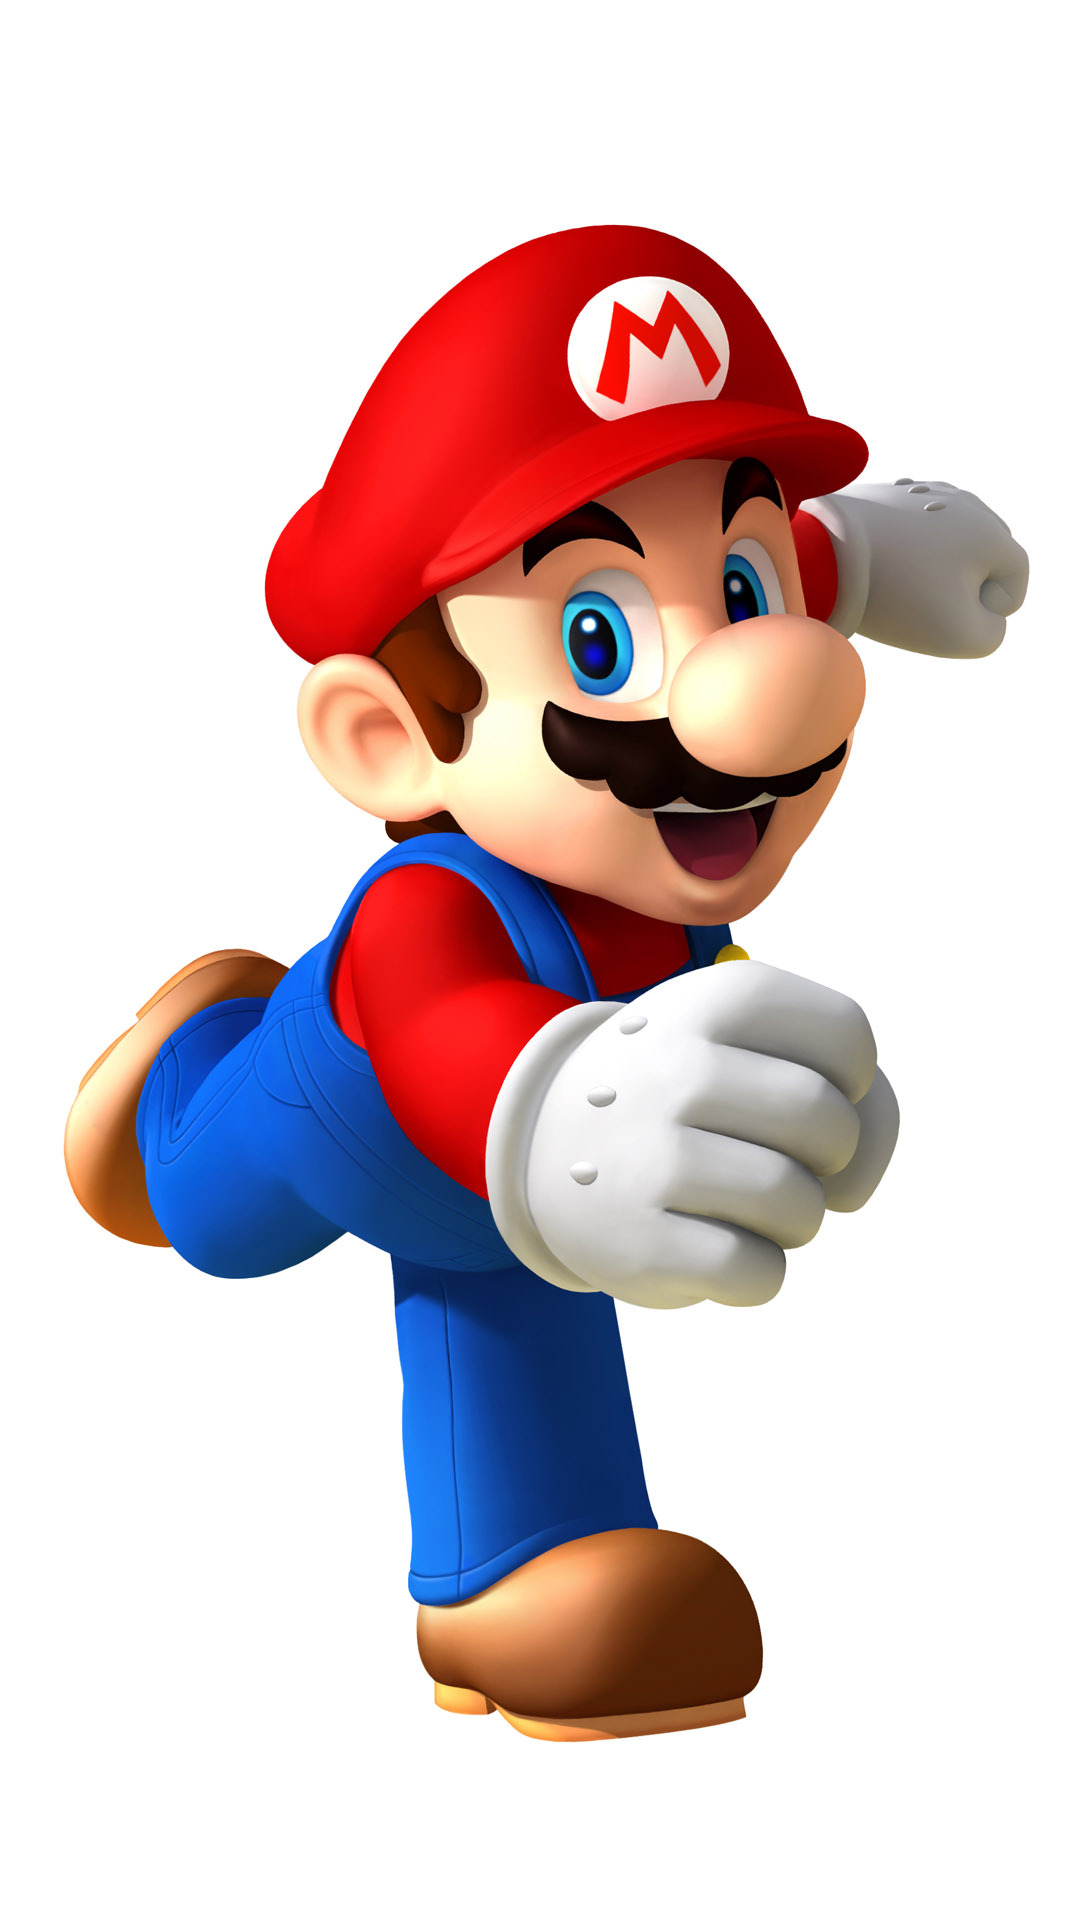 Super Mario wallpapers for iPhone